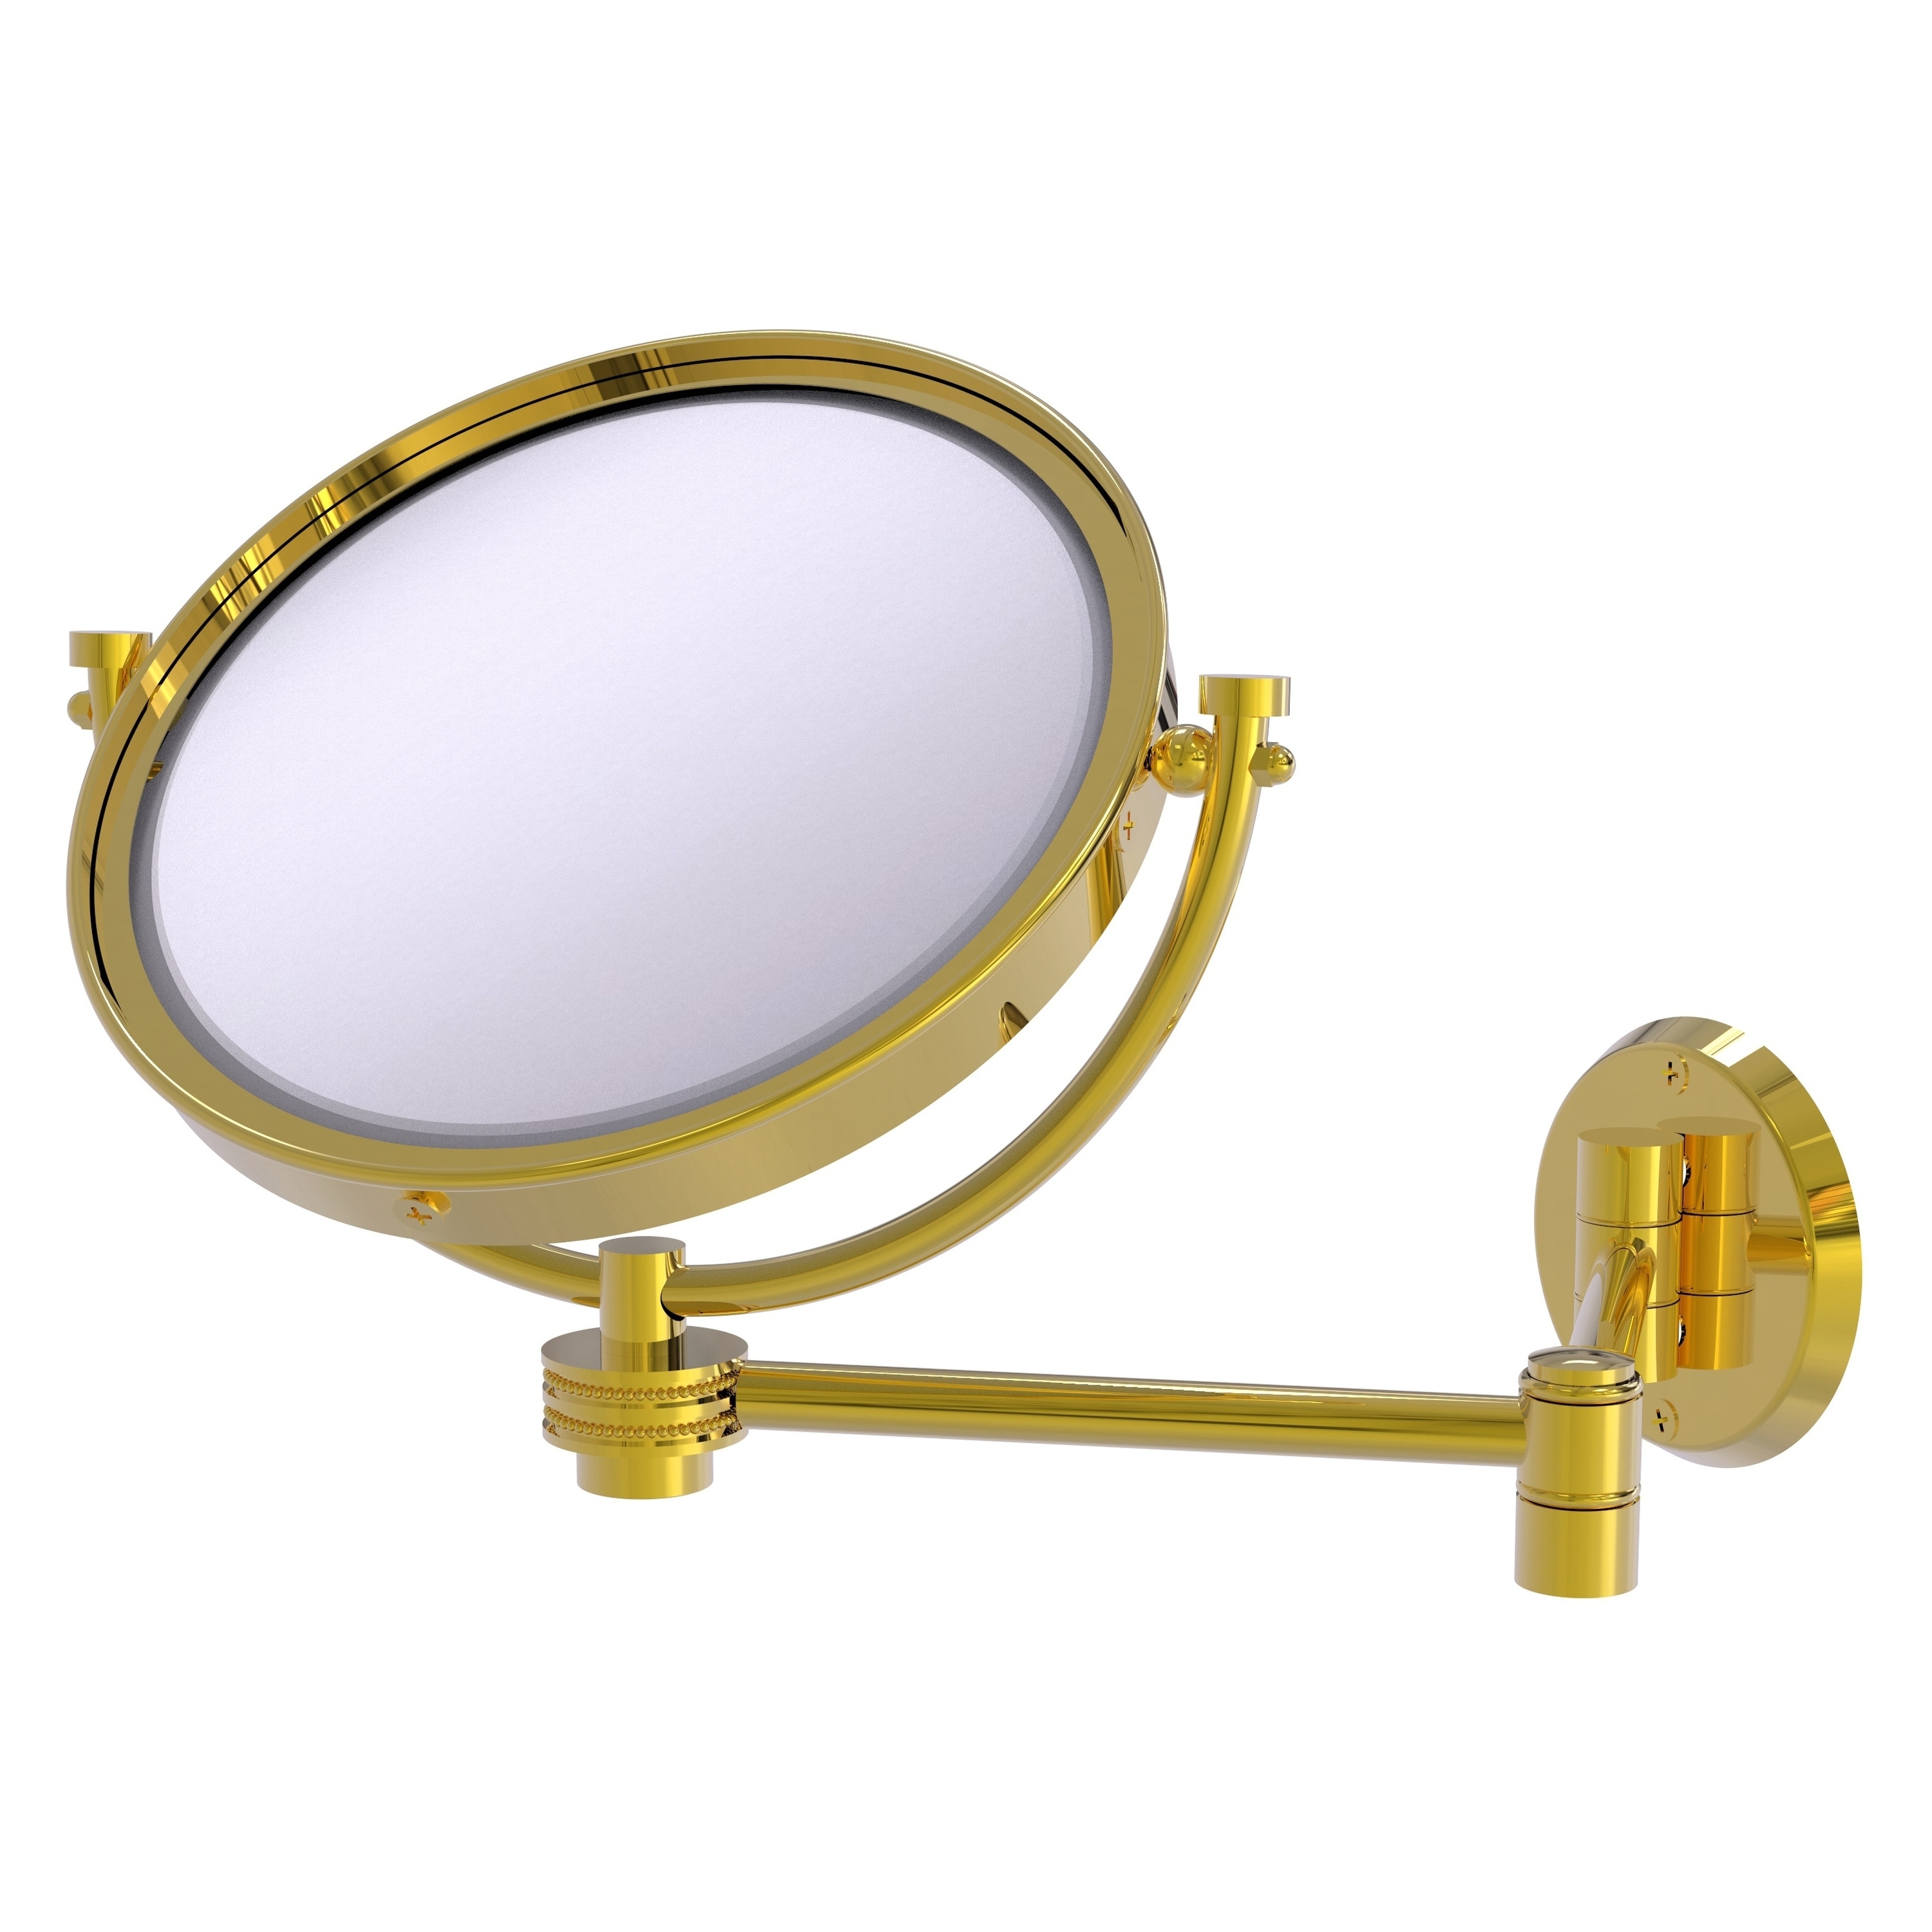 8-in x 10-in Polished Silver Double-sided 5X Magnifying Wall-mounted Vanity Mirror | - Allied Brass WM-6D/4X-PB